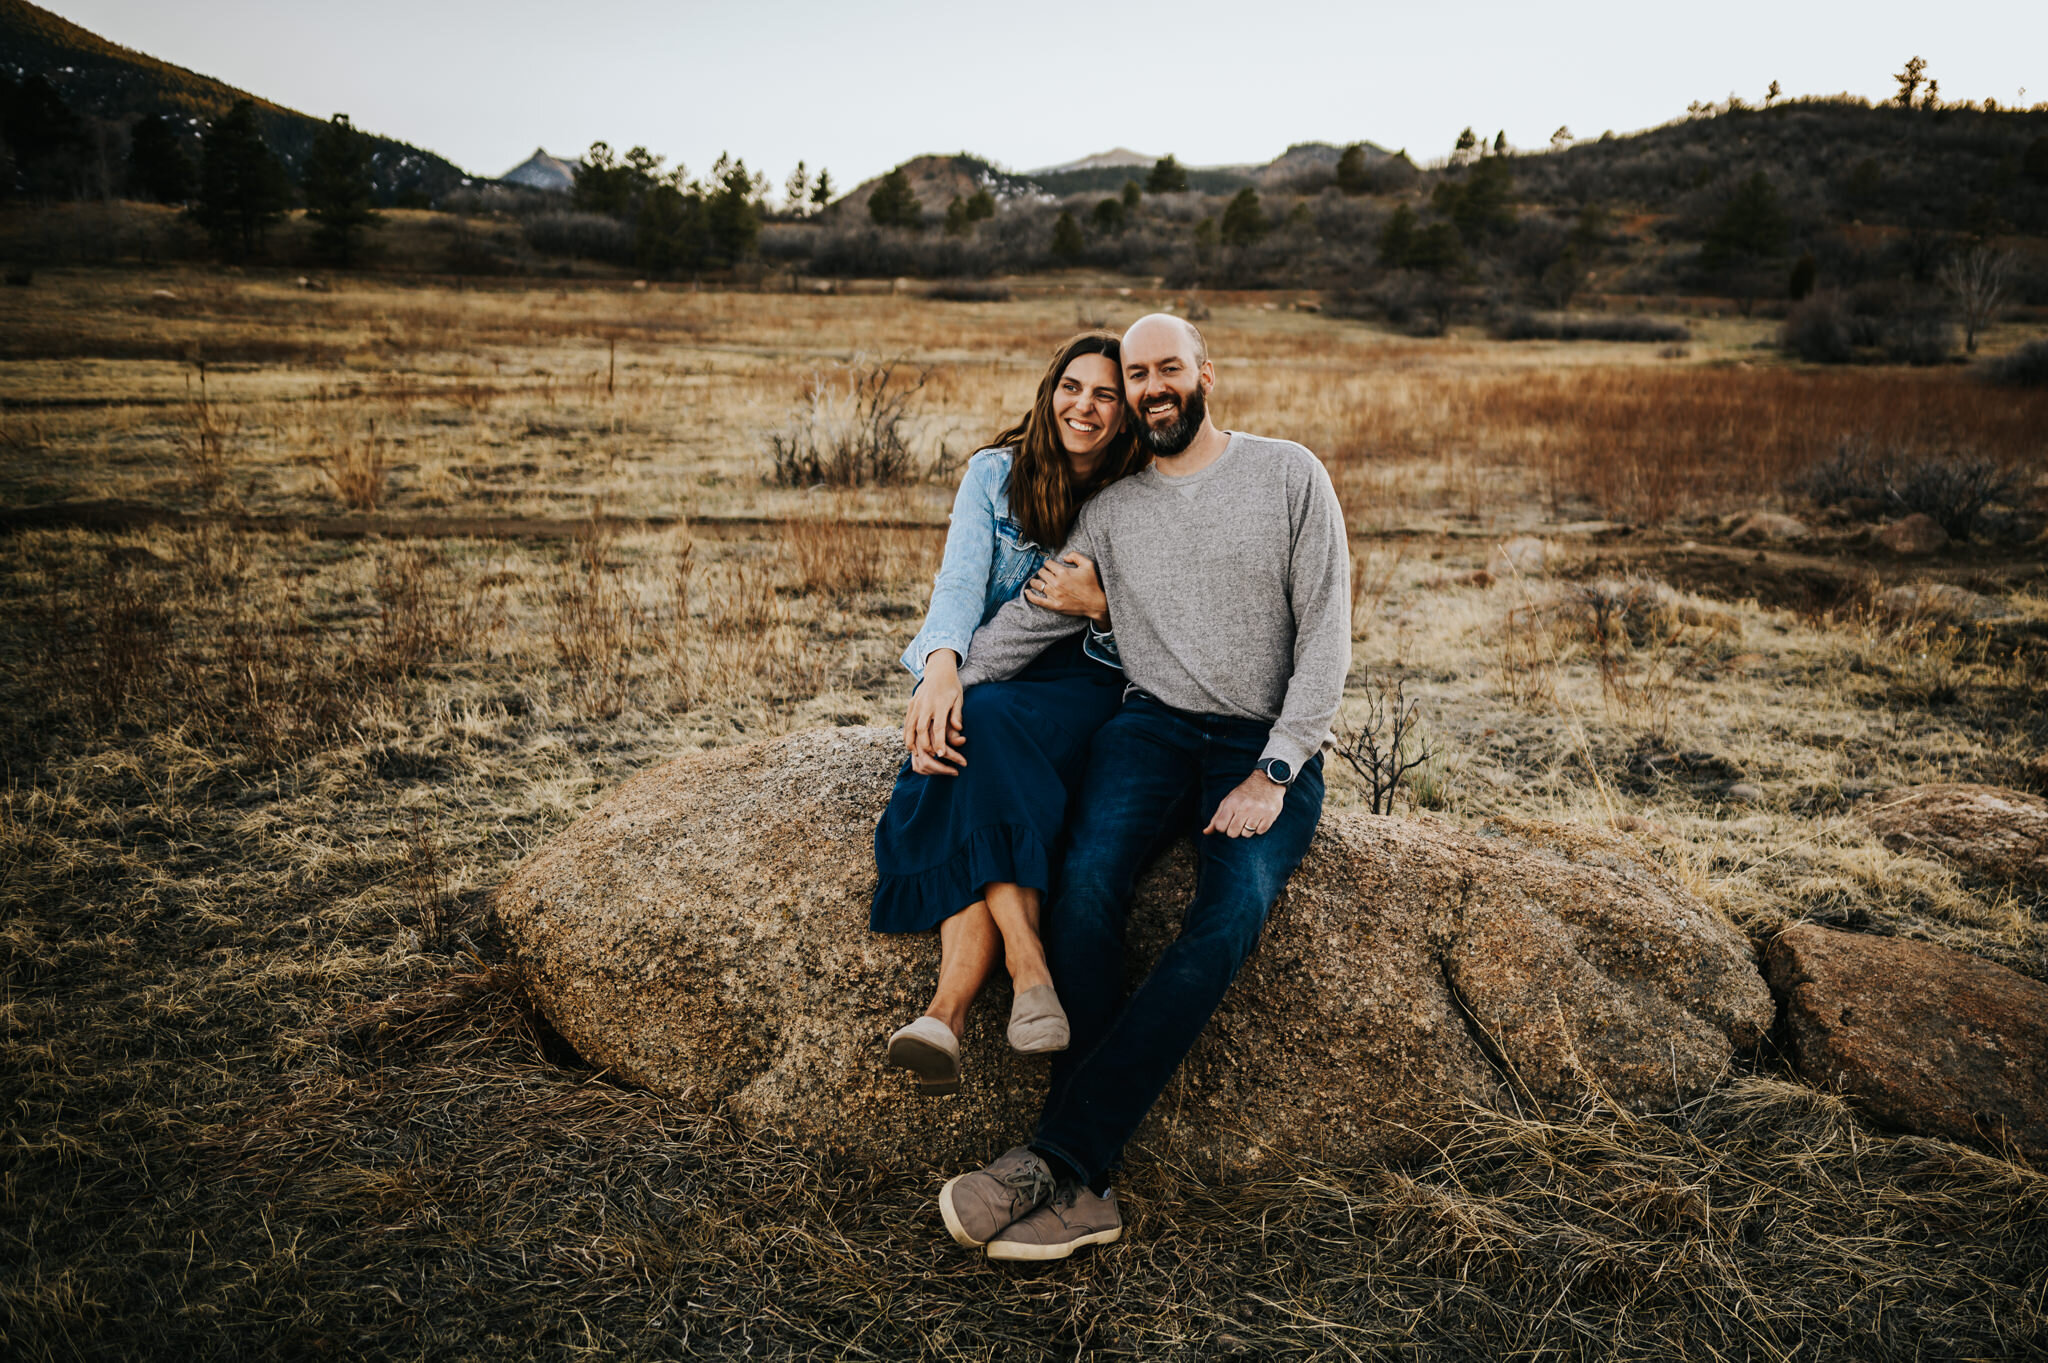 Lisa Liberati Family Session Colorado Springs Photographer Sunset Cheyenne Canyon Mother Father Son Daughter Wild Prairie Photography-6-2020.jpg